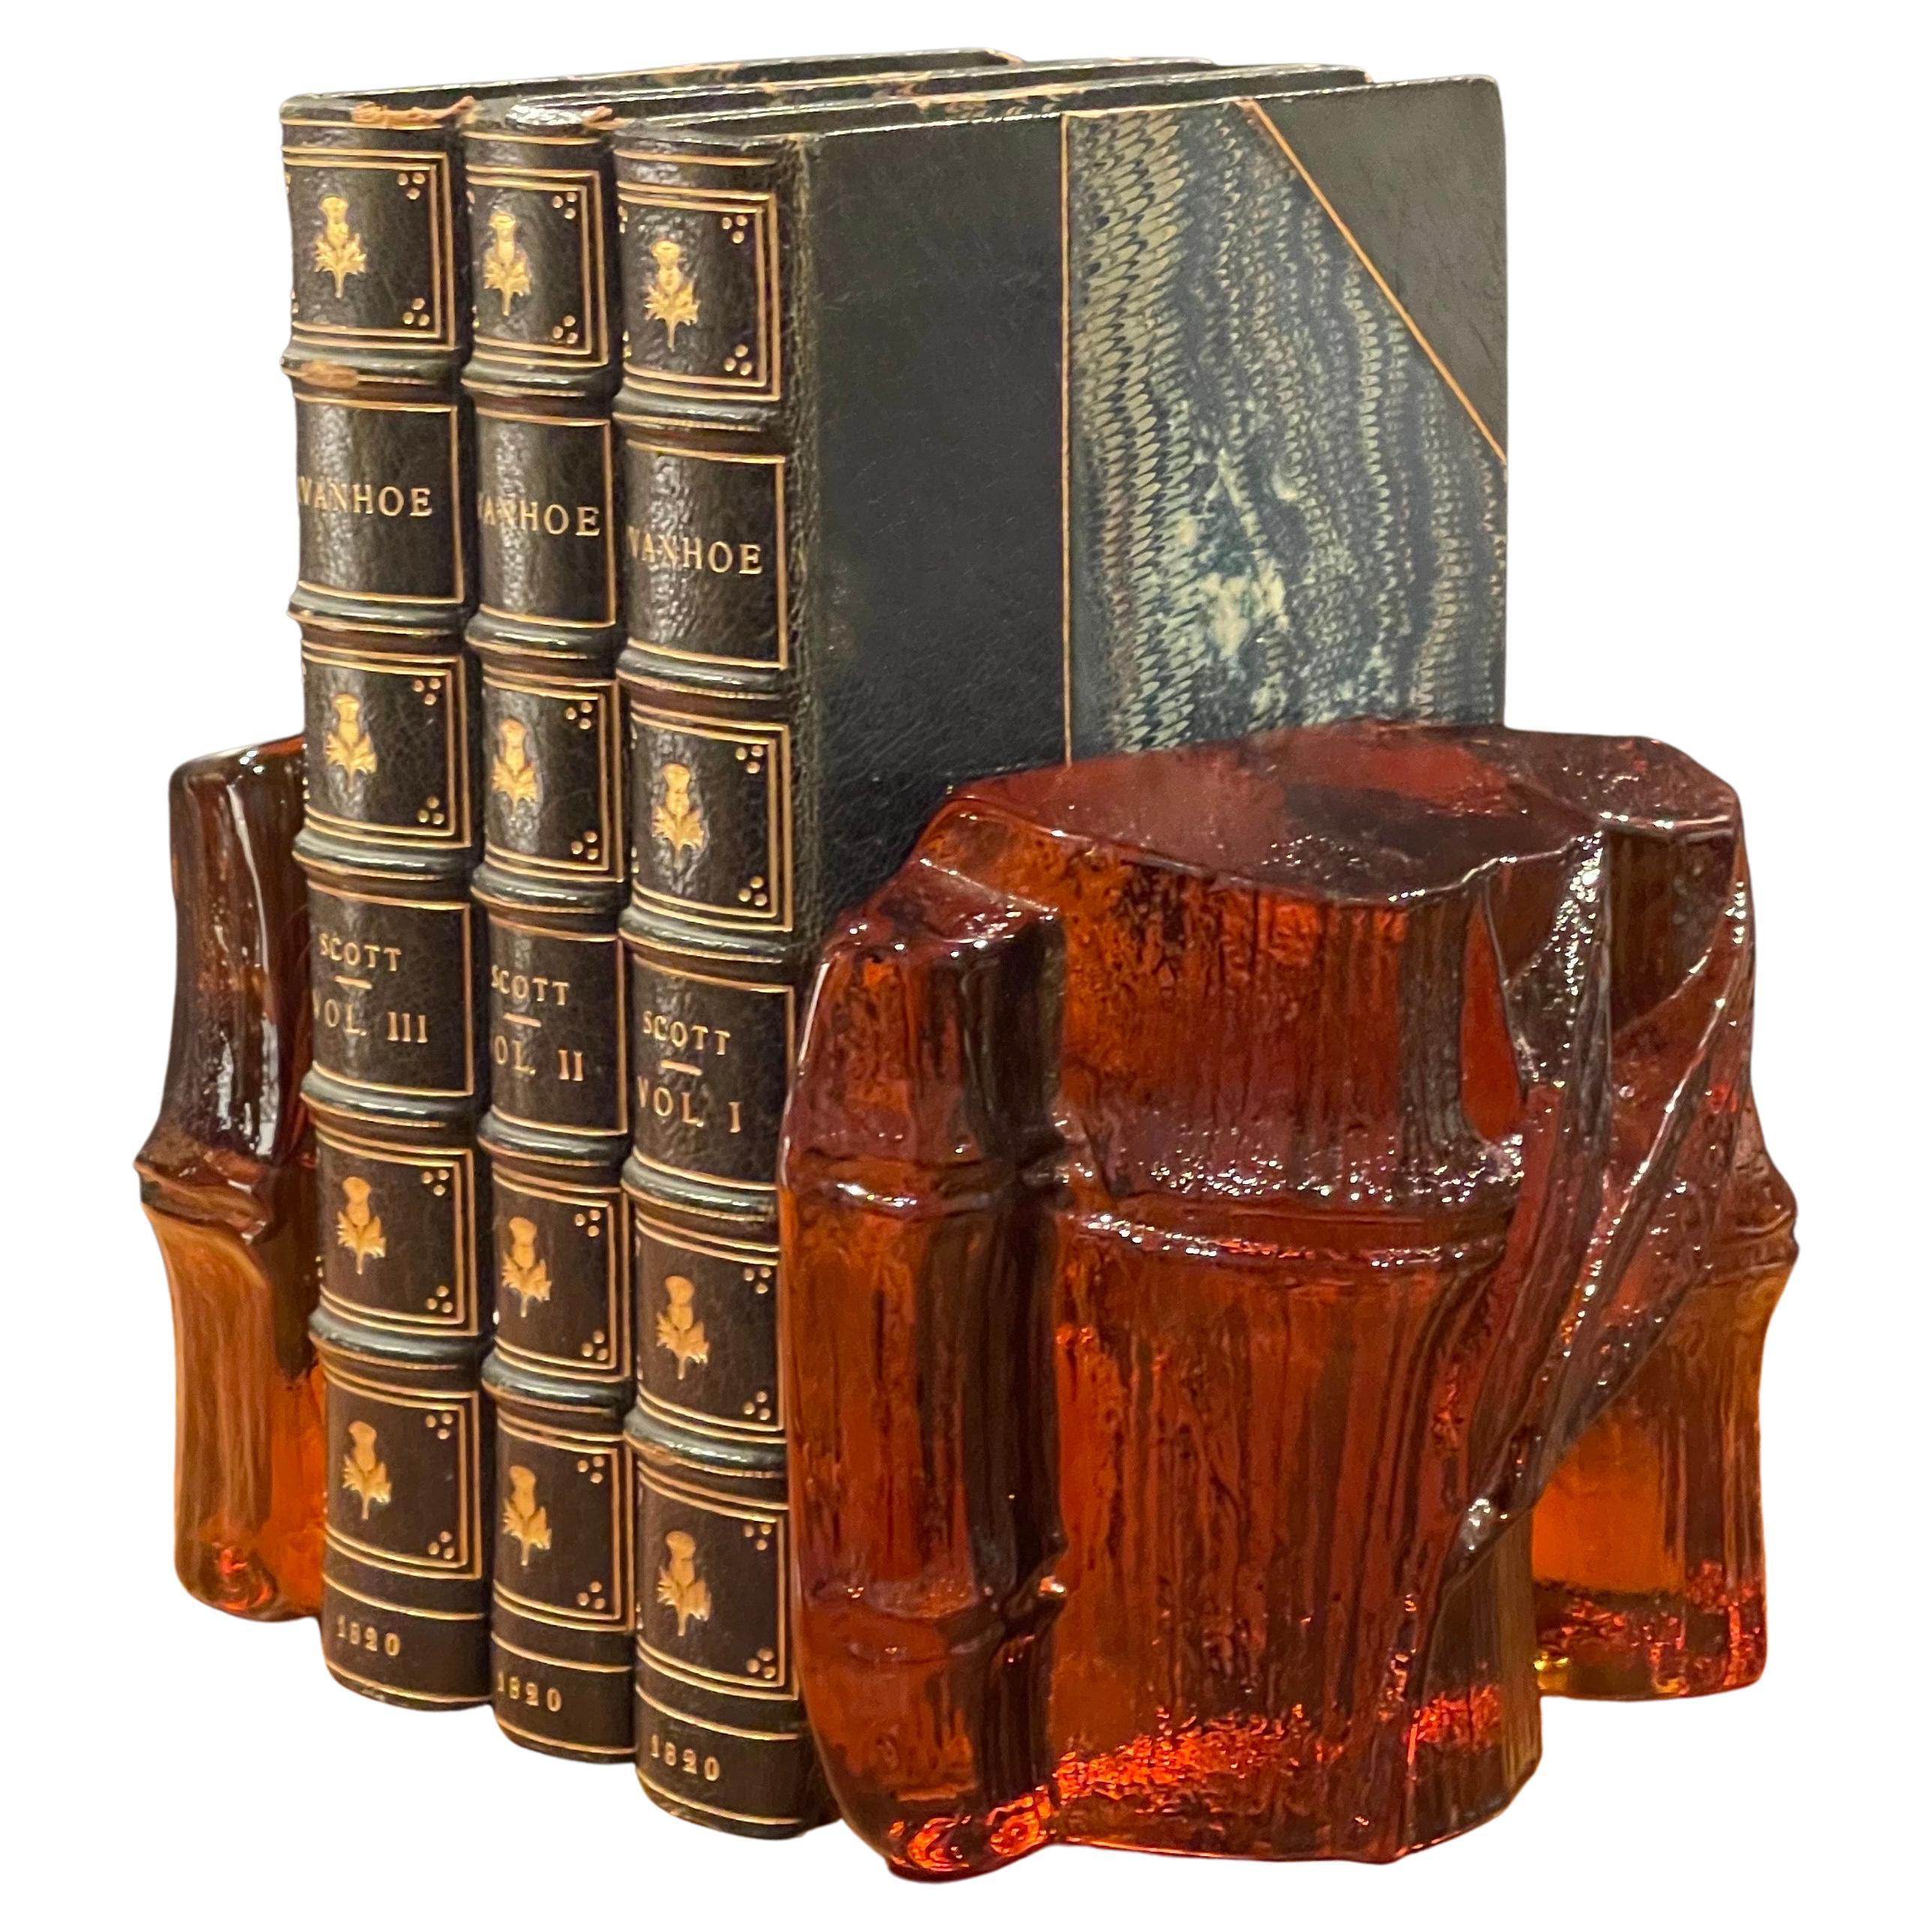 Midcentury pair of amber colored glass bamboo shaft bookends by Blenko, circa 1970s. The bookends are heavy and solid with a smooth back and a textural finish on the front. They are in very good vintage condition with no chips or cracks and Measure